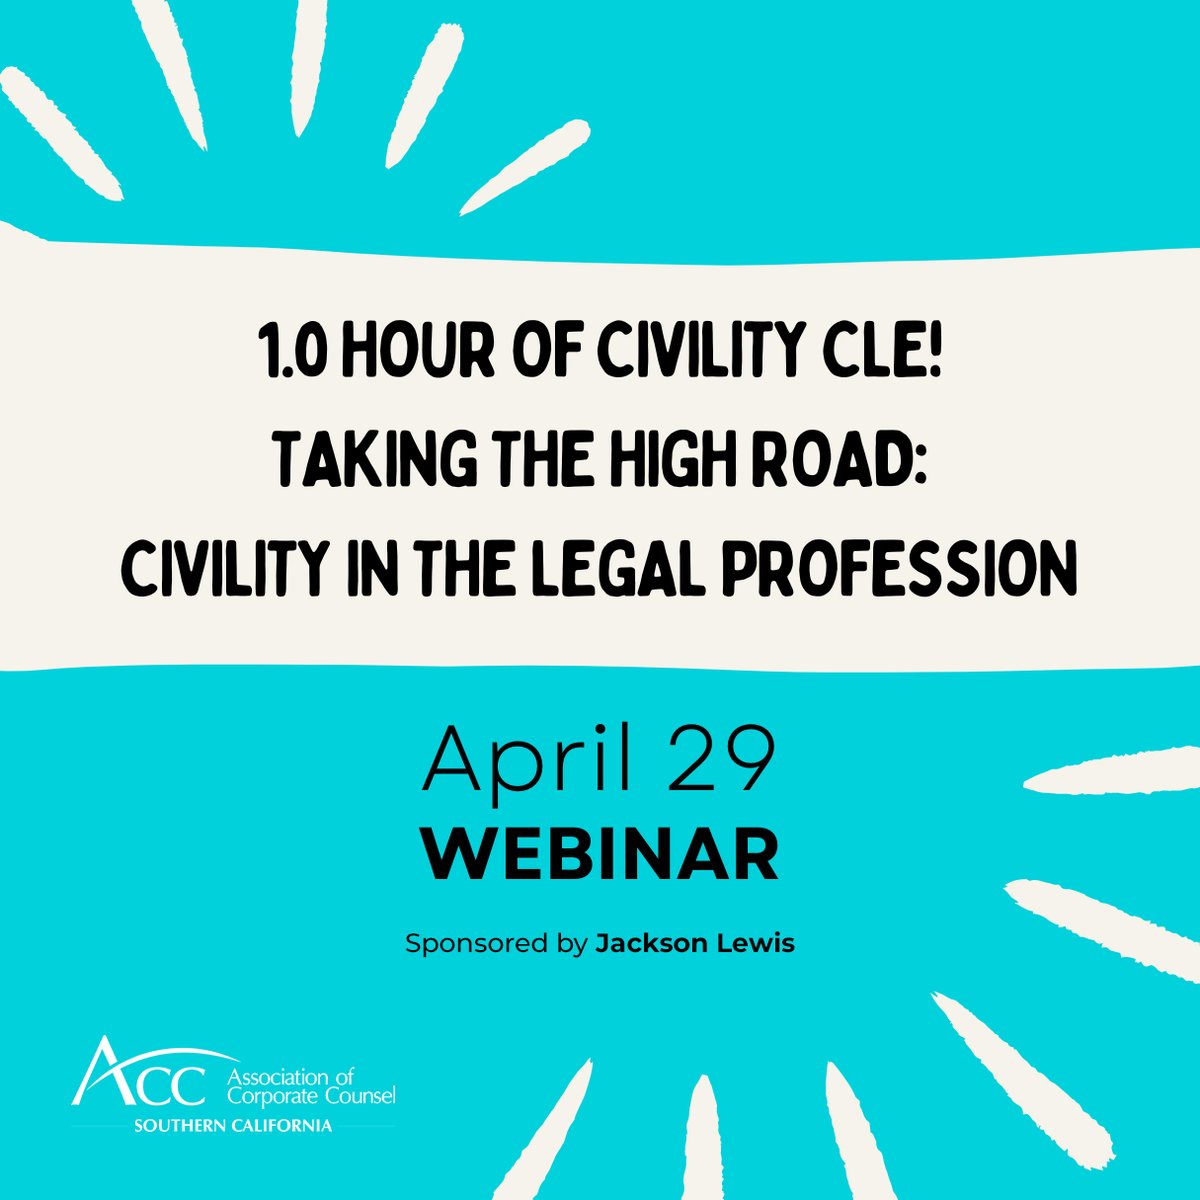 NEW DATE FOR OUR UPCOMING WEBINAR

Civility CLE! Taking the High Road: Civility in the Legal Profession

acc.com/education-even…

#acc #accfamily #accsouthernca #accsocalevents #webinar #CLE #civility #civilityCLE #inhousecounsel #corporatecounsel #inhouseattorney #inhouselawyer